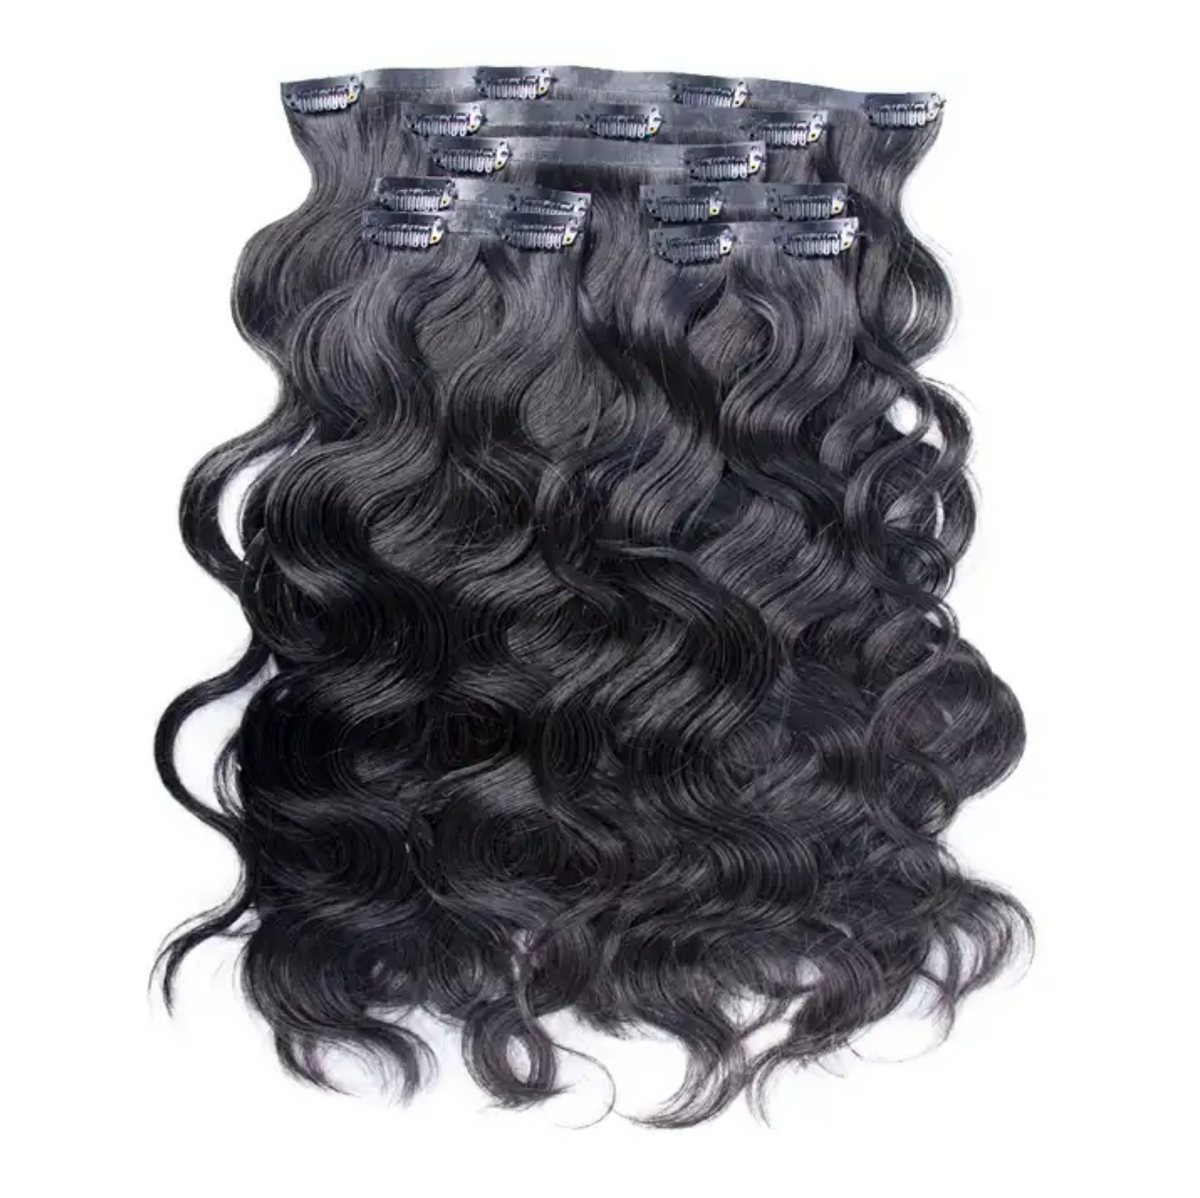 Acai Vietnamese Body Wave Seamless Clip Ins | Hypoallergenic - Allergy Friendly - Naturally Free